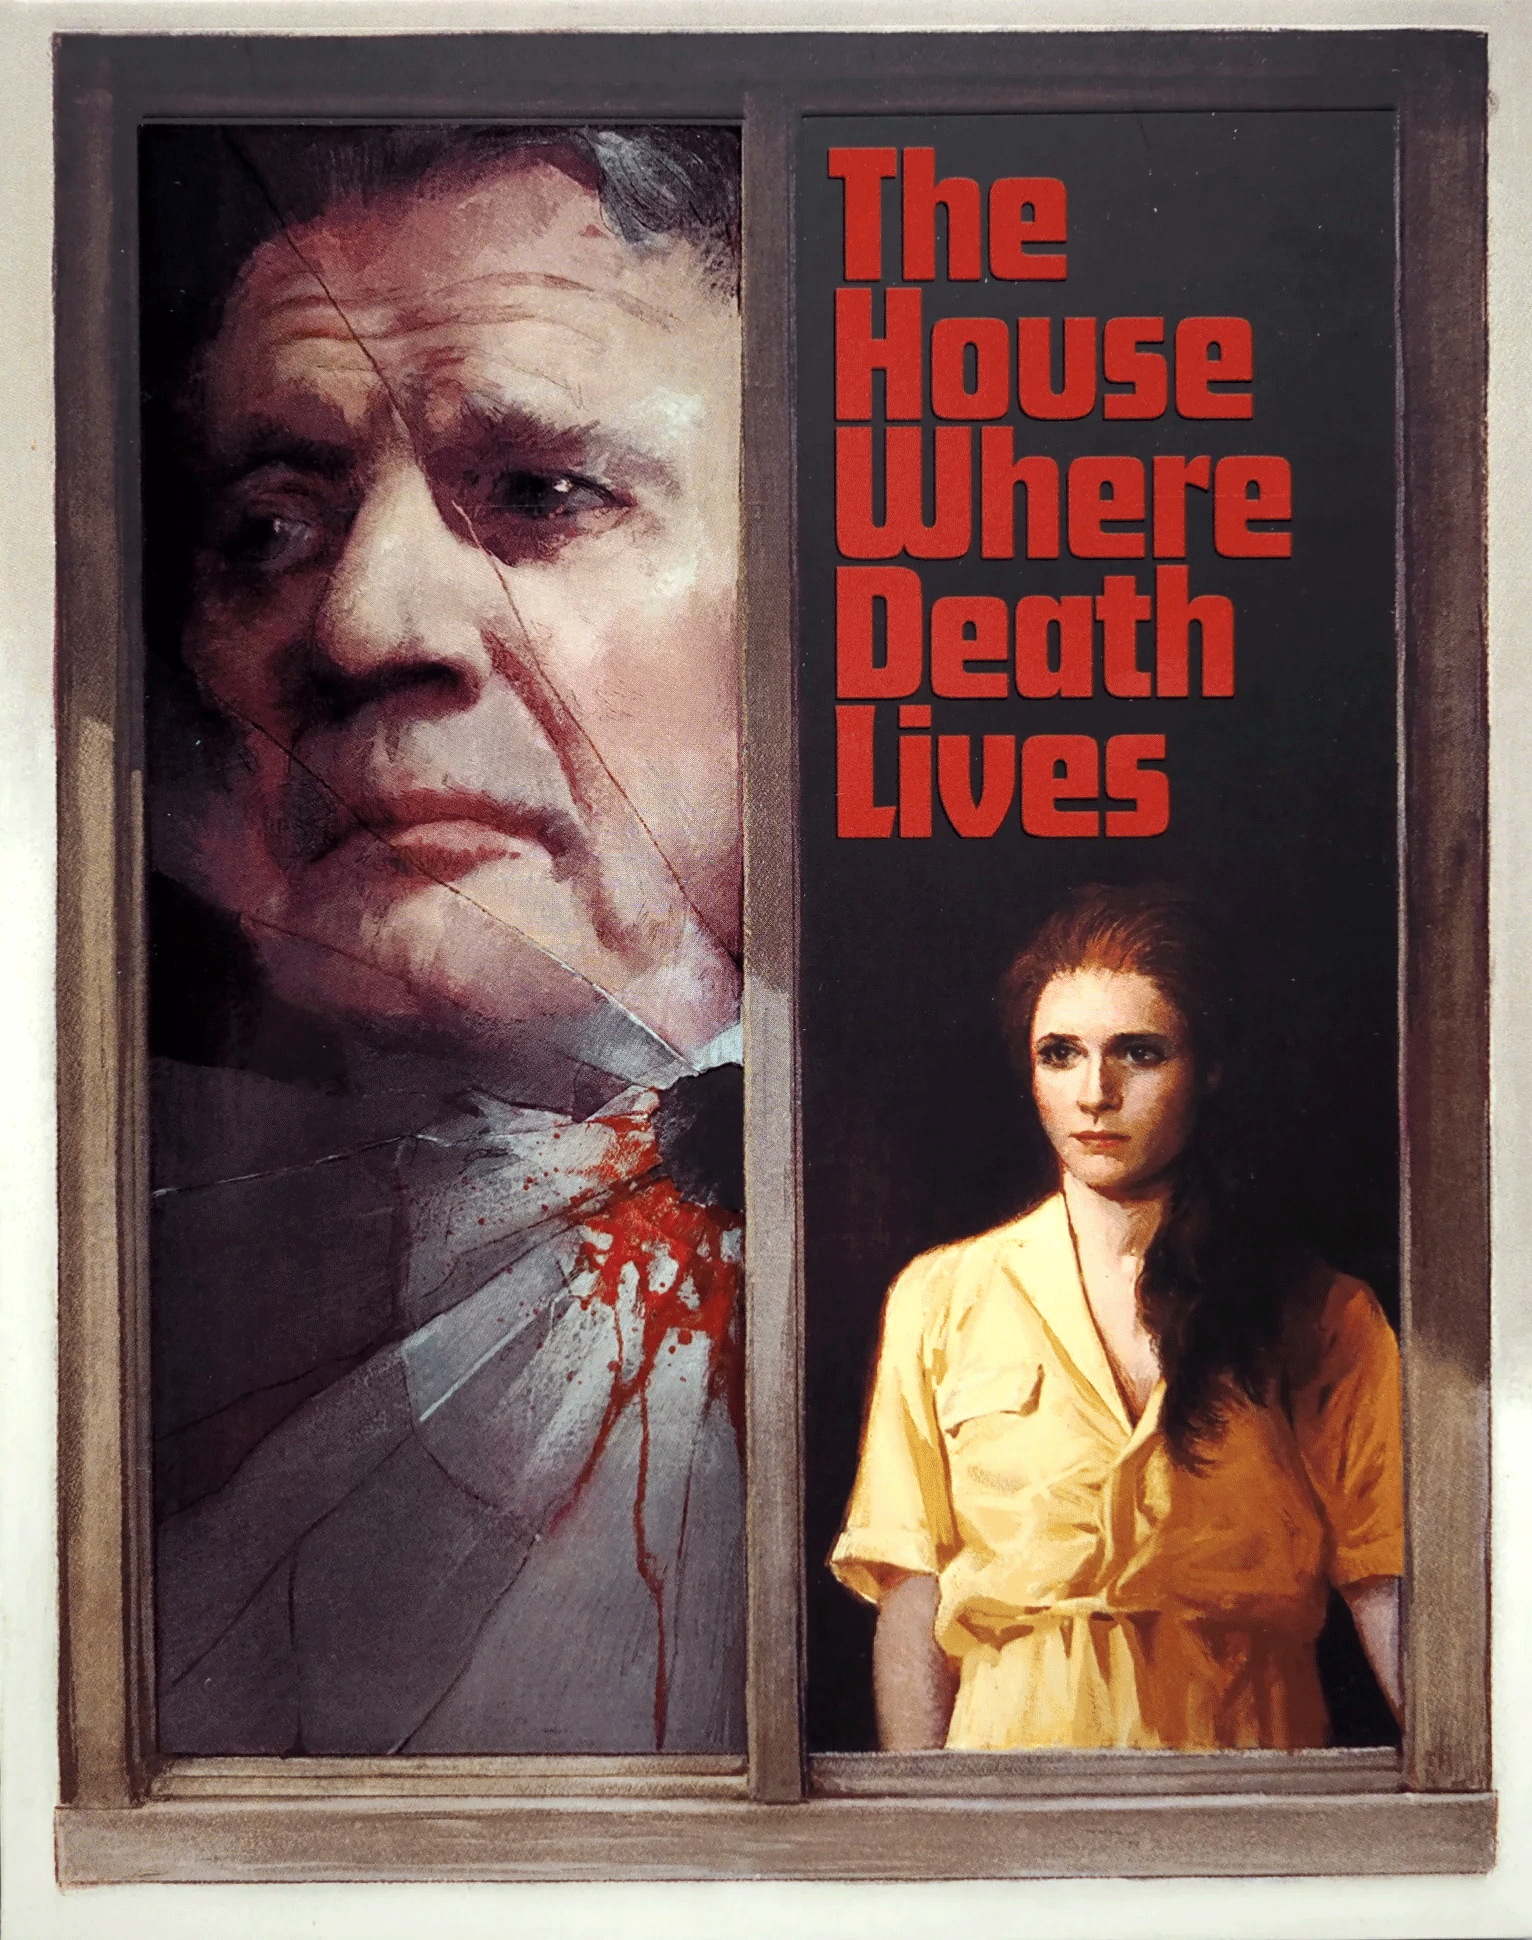 THE HOUSE WHERE DEATH LIVES - BLU-RAY (LIMITED EDITION)